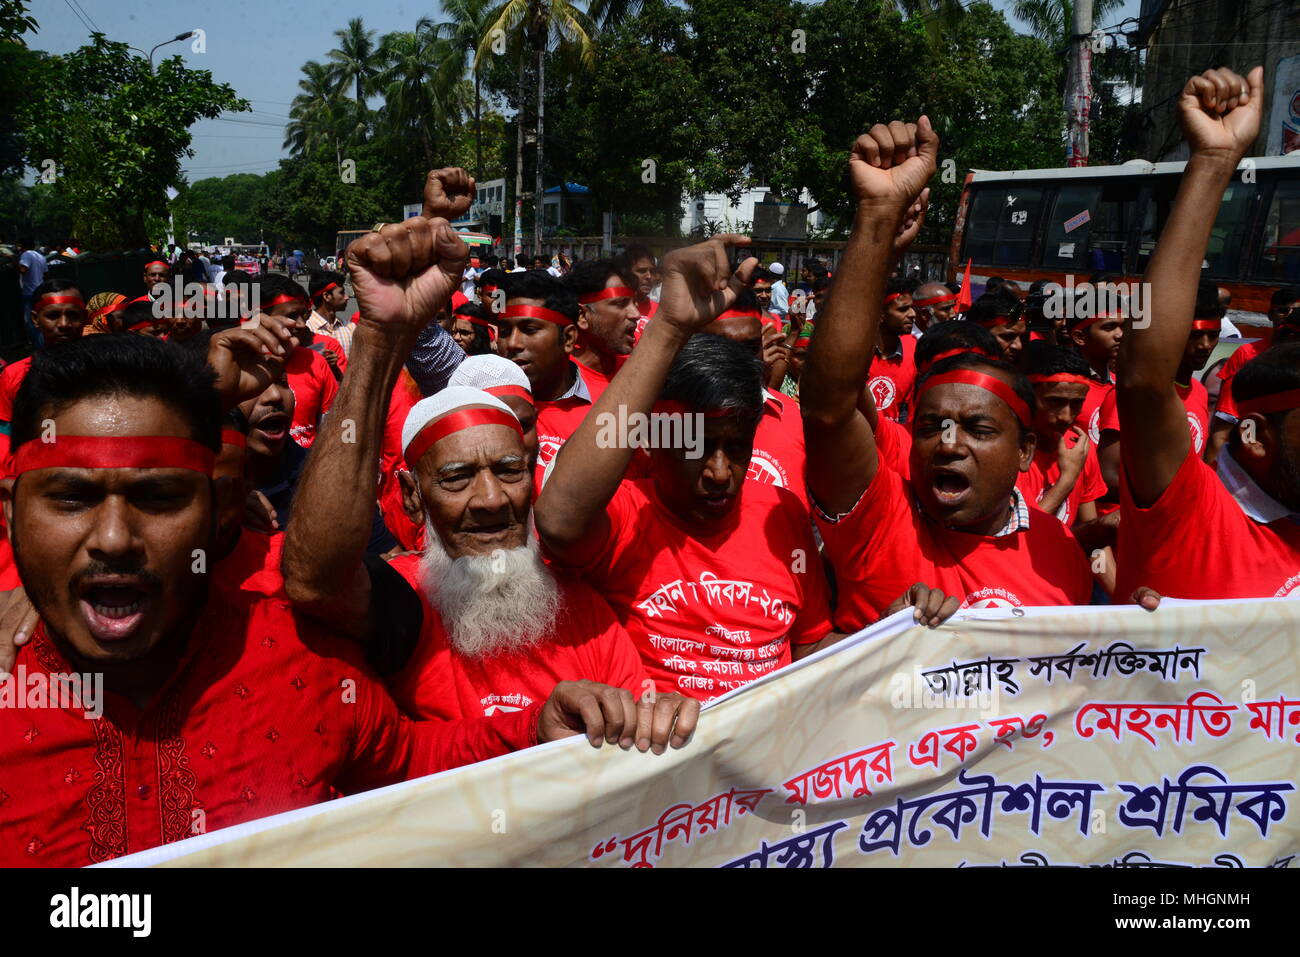 Bangladeshi garment workers and other labor organization members take part in a rally to mark May Day, International Workers' Day in Dhaka, Bangladesh. On May 01, 2018 Credit: Mamunur Rashid/Alamy Live News Stock Photo